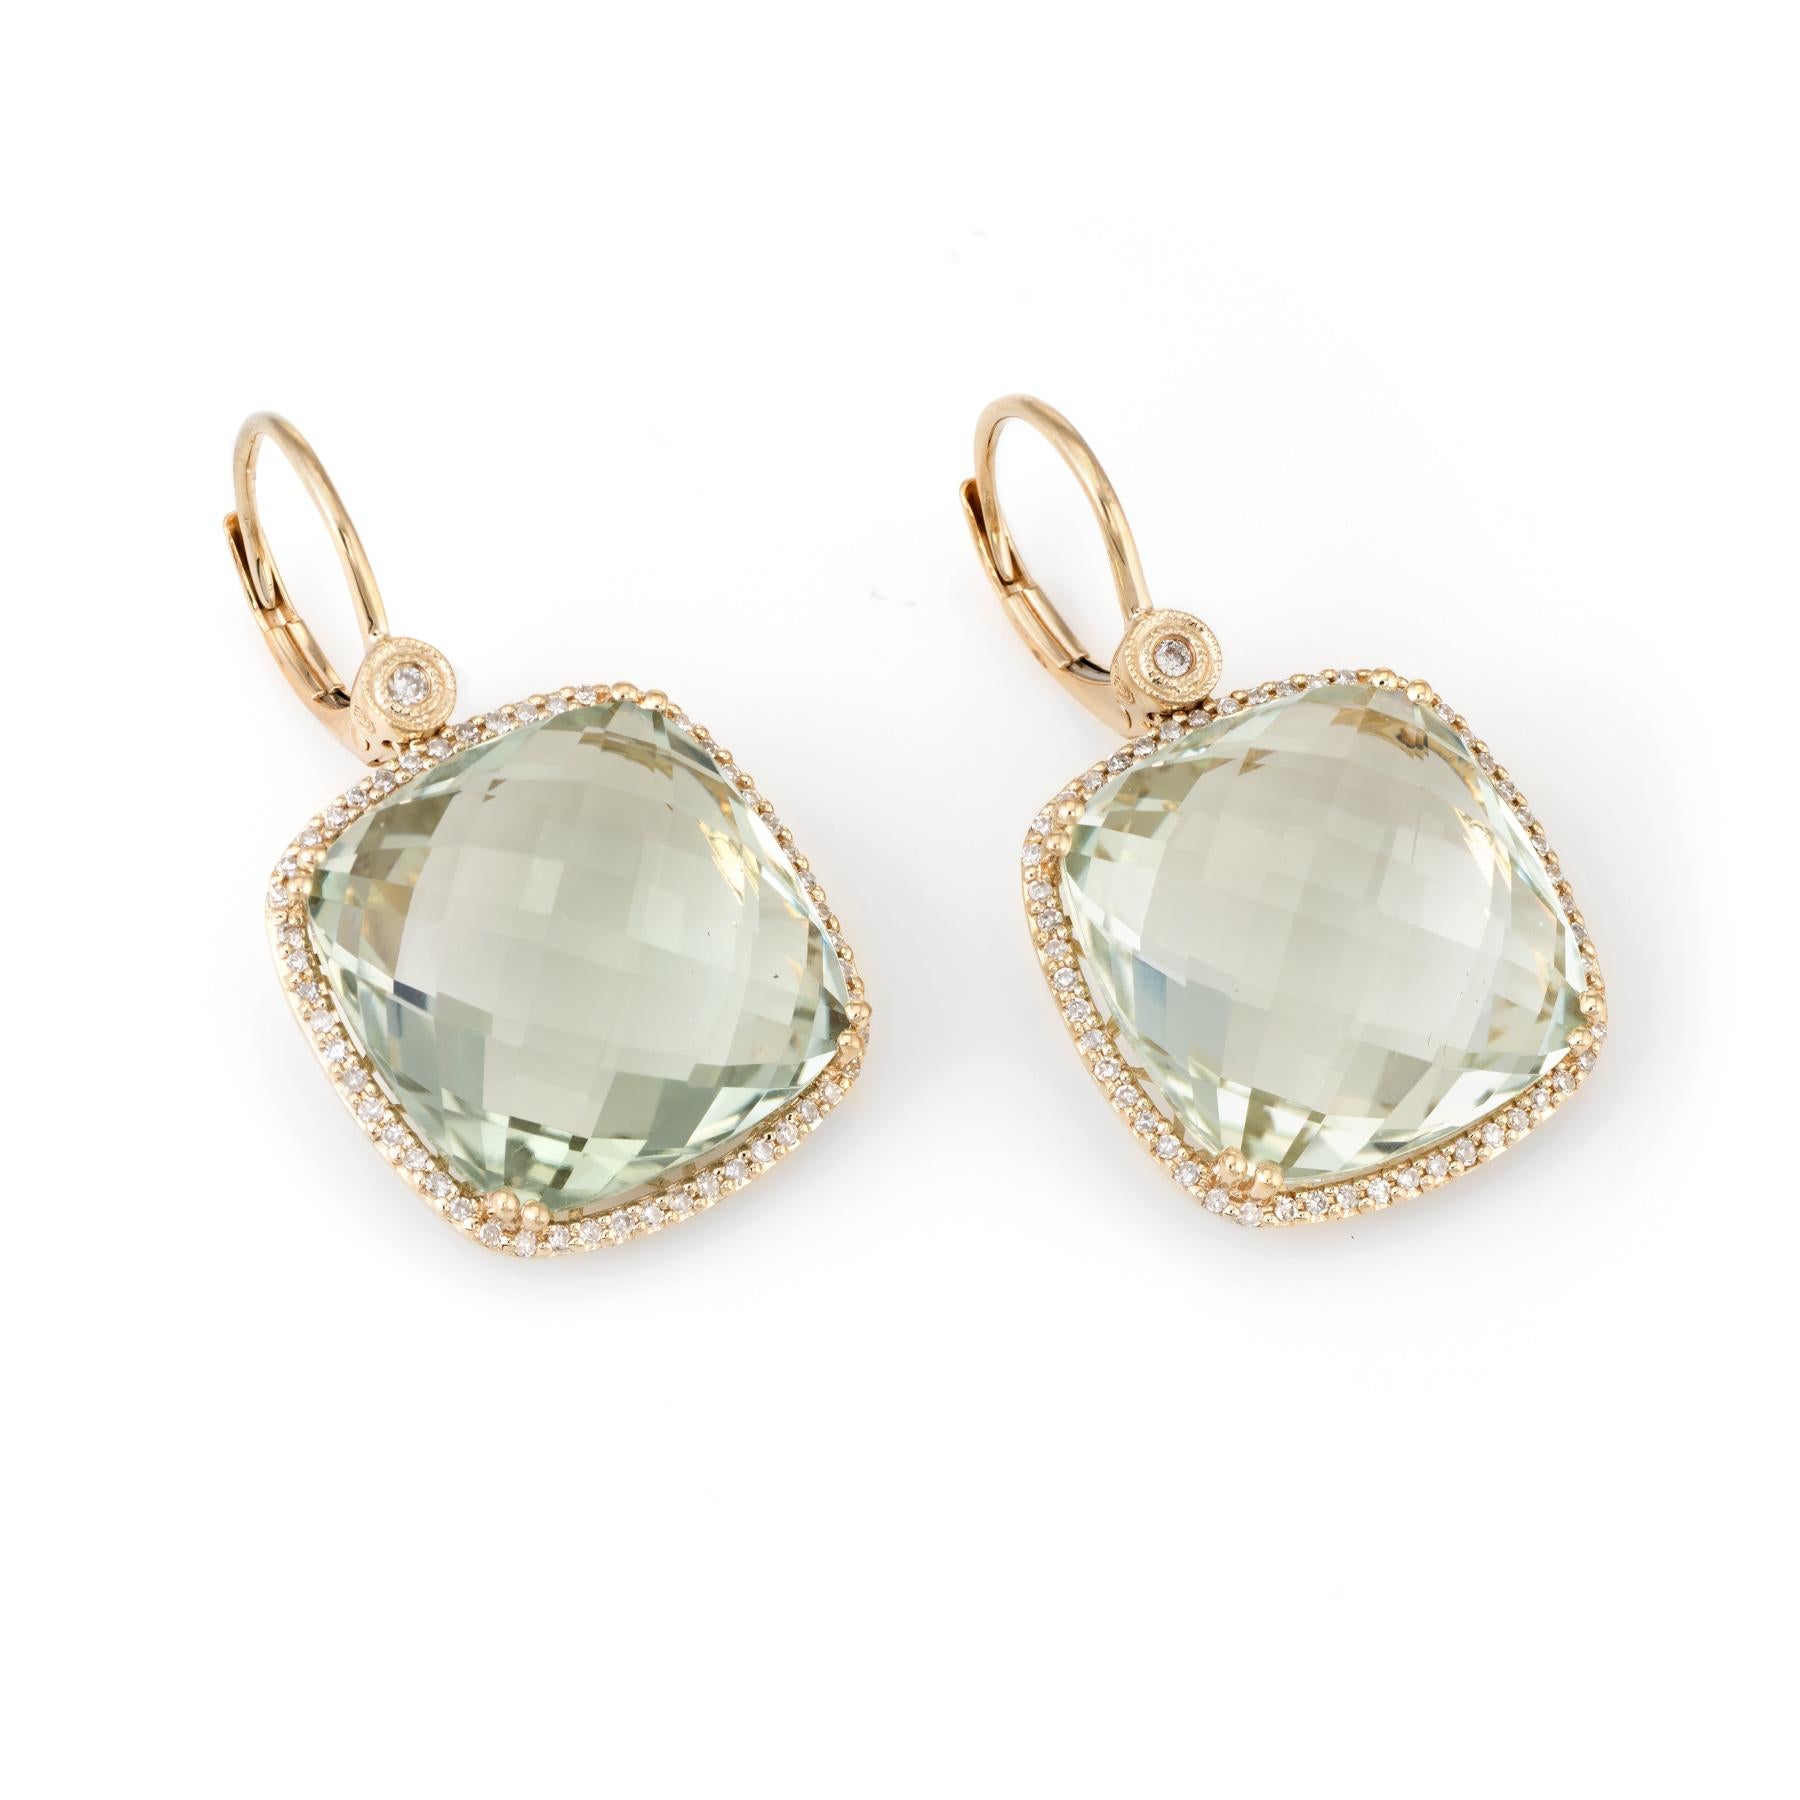 Elegant pair of prasiolite green amethyst & diamond earrings, crafted in 14k yellow gold. 

Checkerboard faceted prasiolite measures 15.8mm each (estimated at 15 carats each - 30 carats total estimated weight), accented with an estimated 0.59 carats